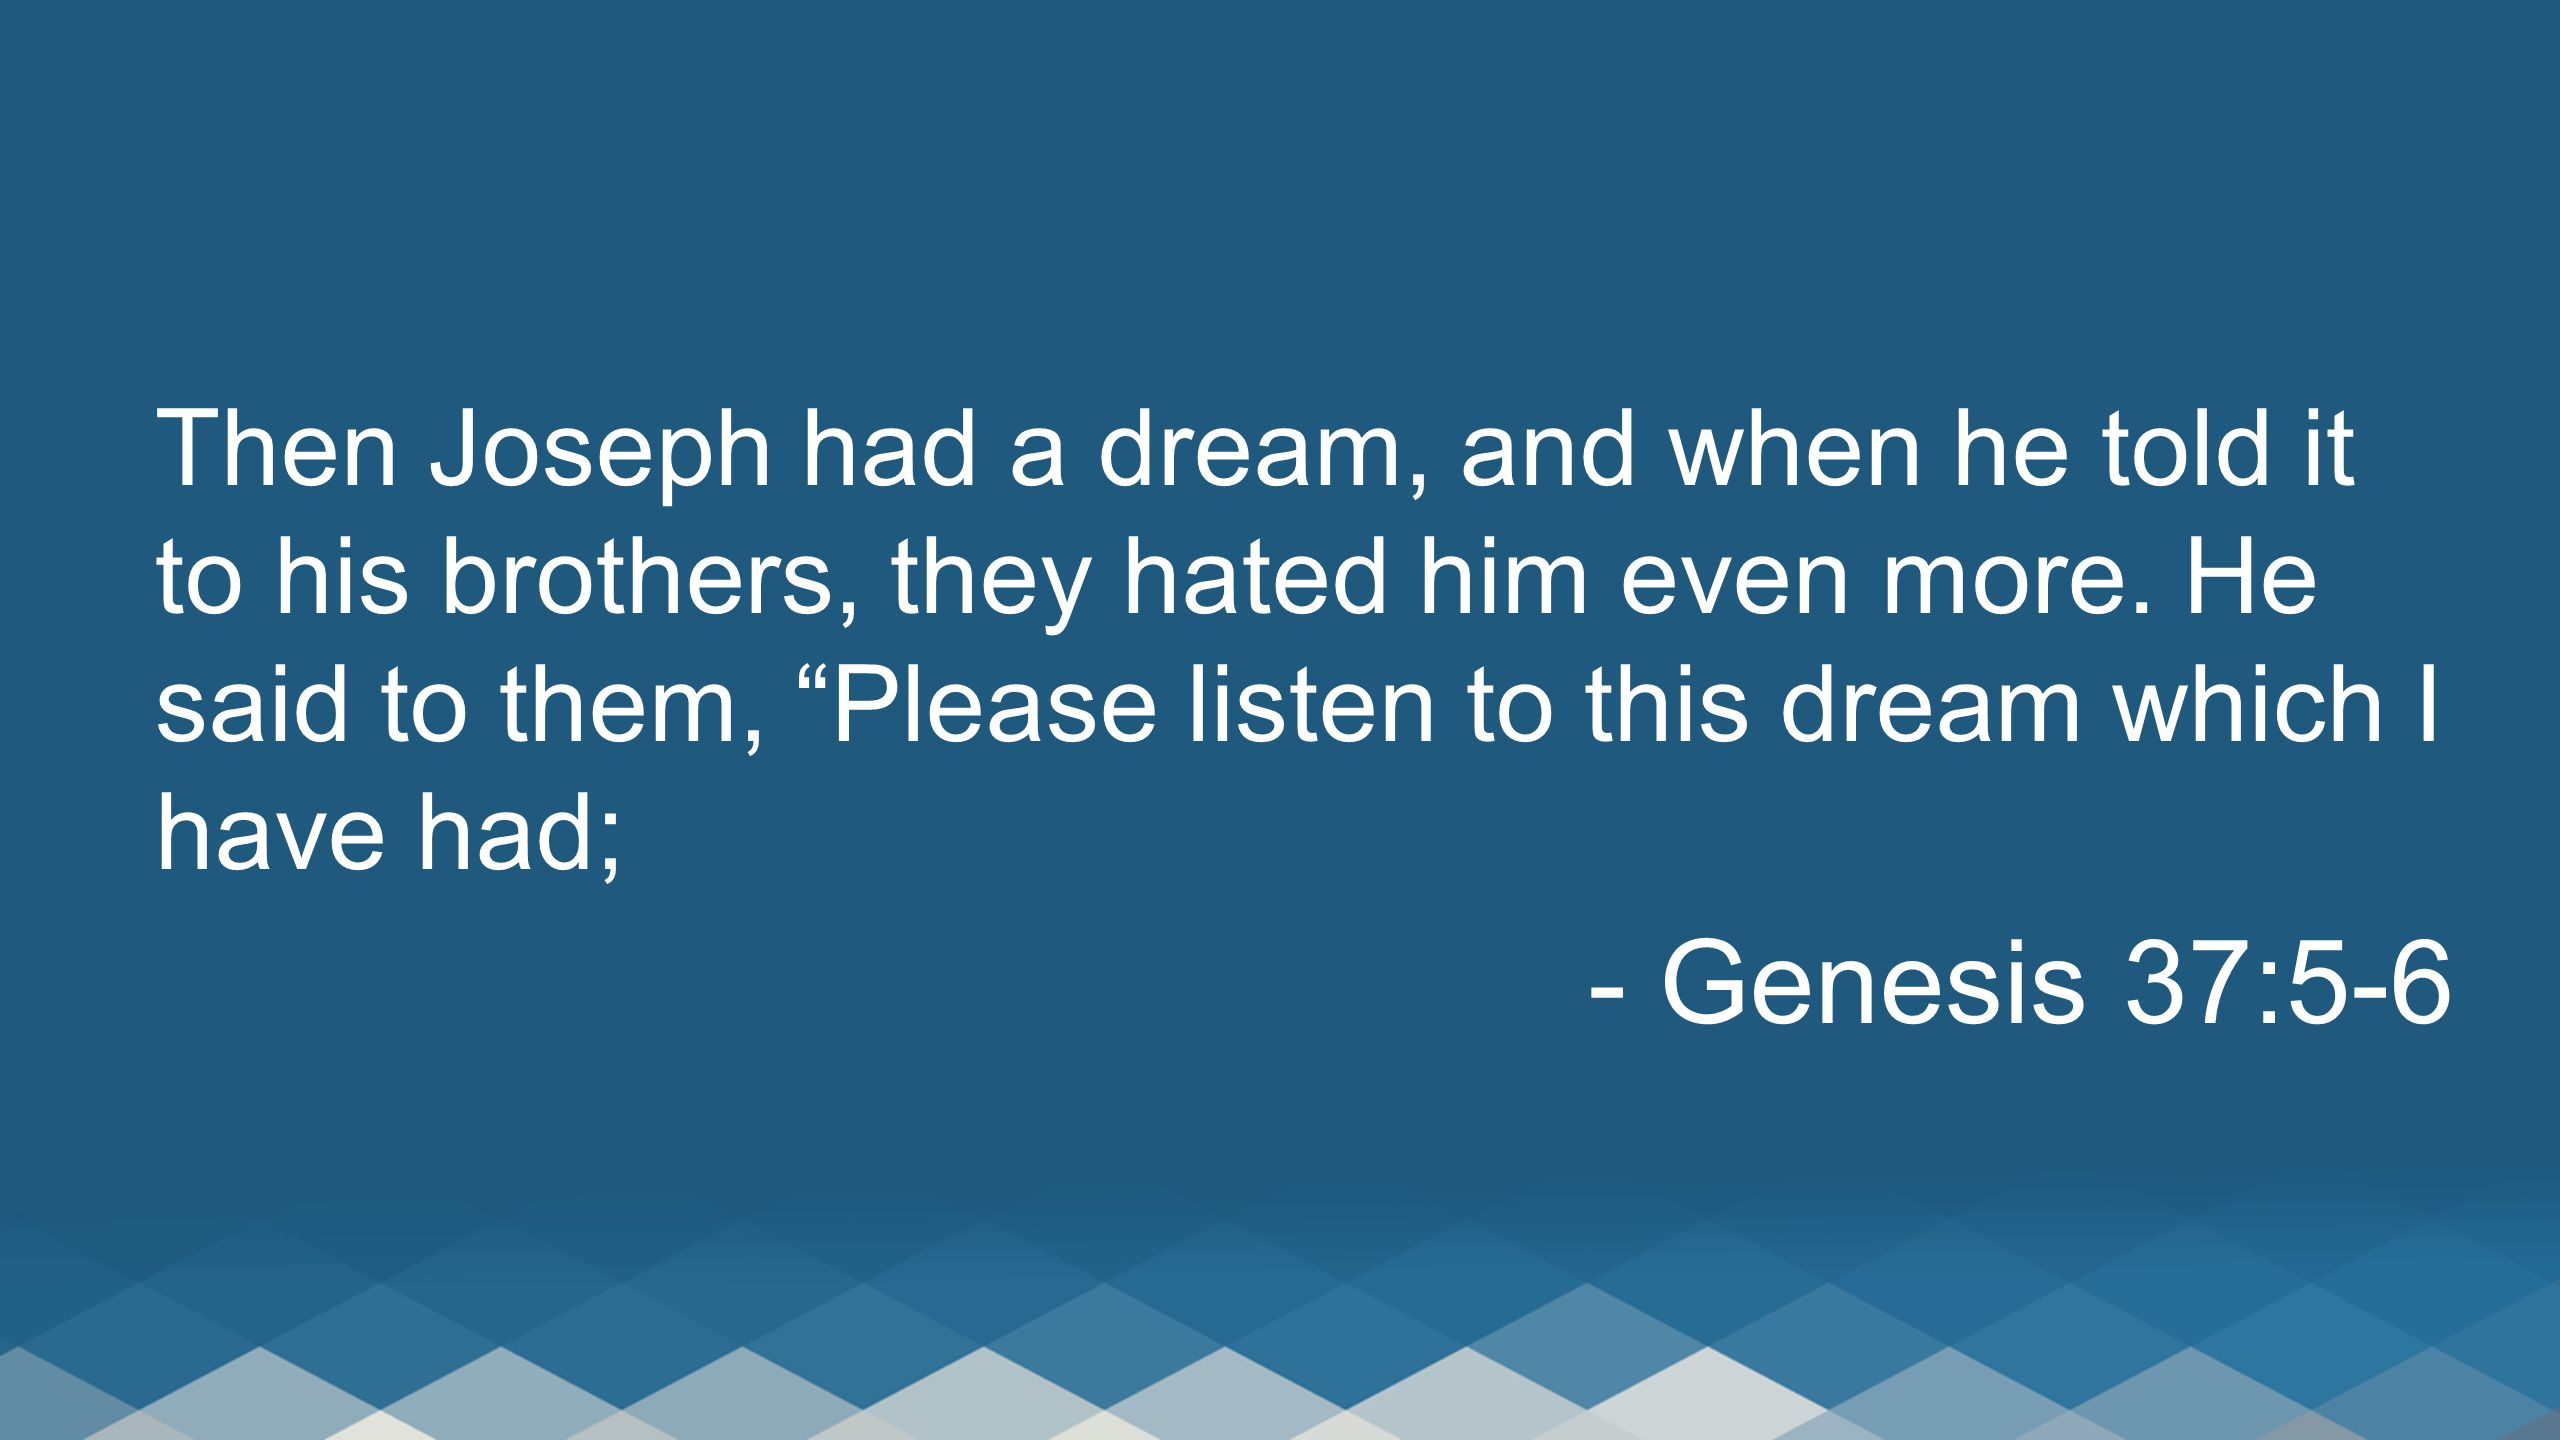 Then Joseph had a dream, and when he told it to his brothers, they hated him even more.